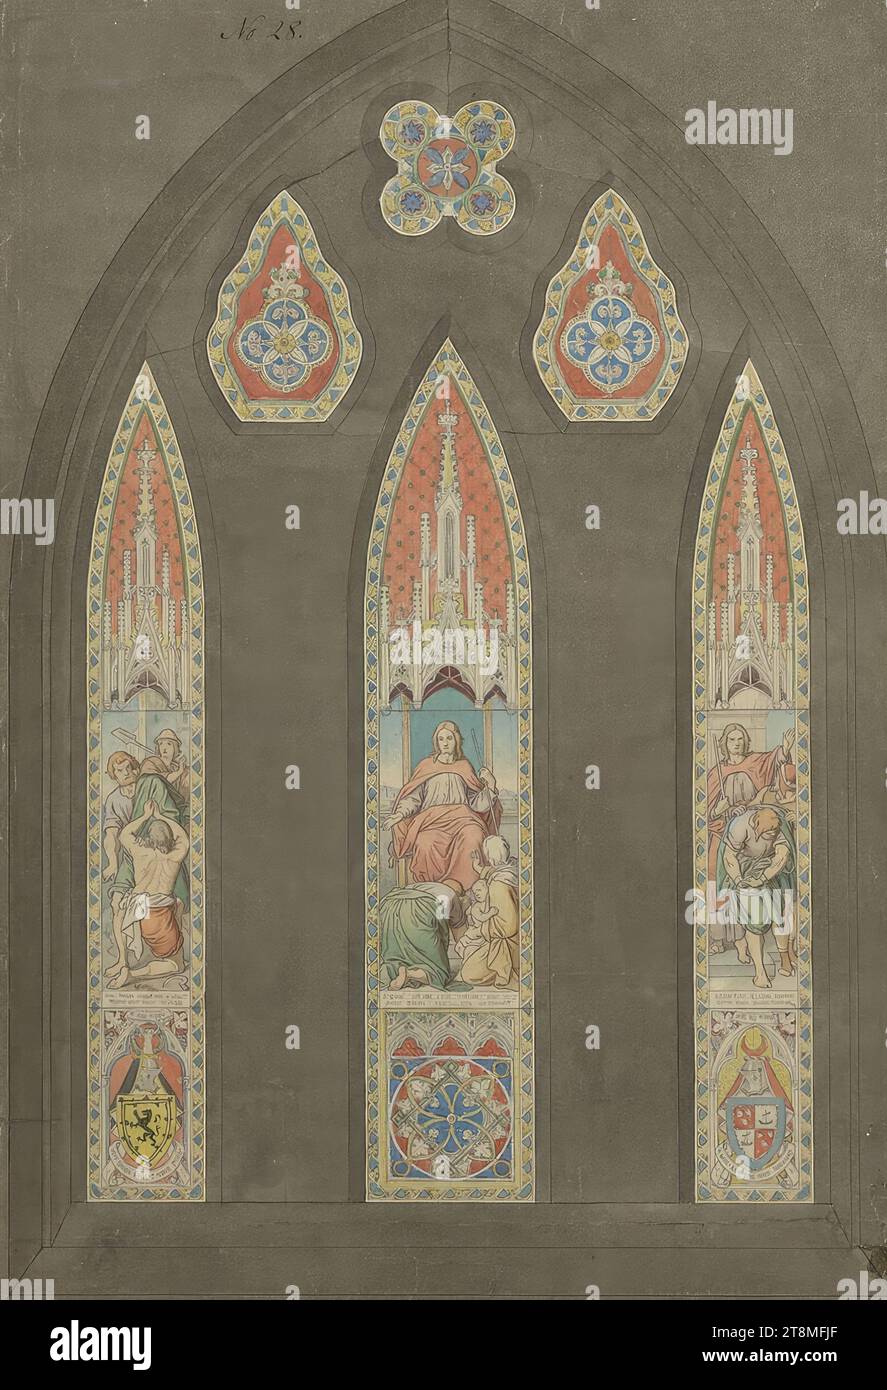 Draft glass window for Glasgow Cathedral: The Parable of the Debtors, Georg Fortner (Munich 1814 - 1879 Munich), 1861-1862, drawing, pencil, black-grey pen, watercolour, opaque paint, opaque white, 505 x 348 mm, l.o. 'No 28.' (pen in black-brown) - verso: l.l. 'For the Com.tee Andrew app' (brown pen); 'WCowper first Ct. of <...>' (pen in brown Stock Photo